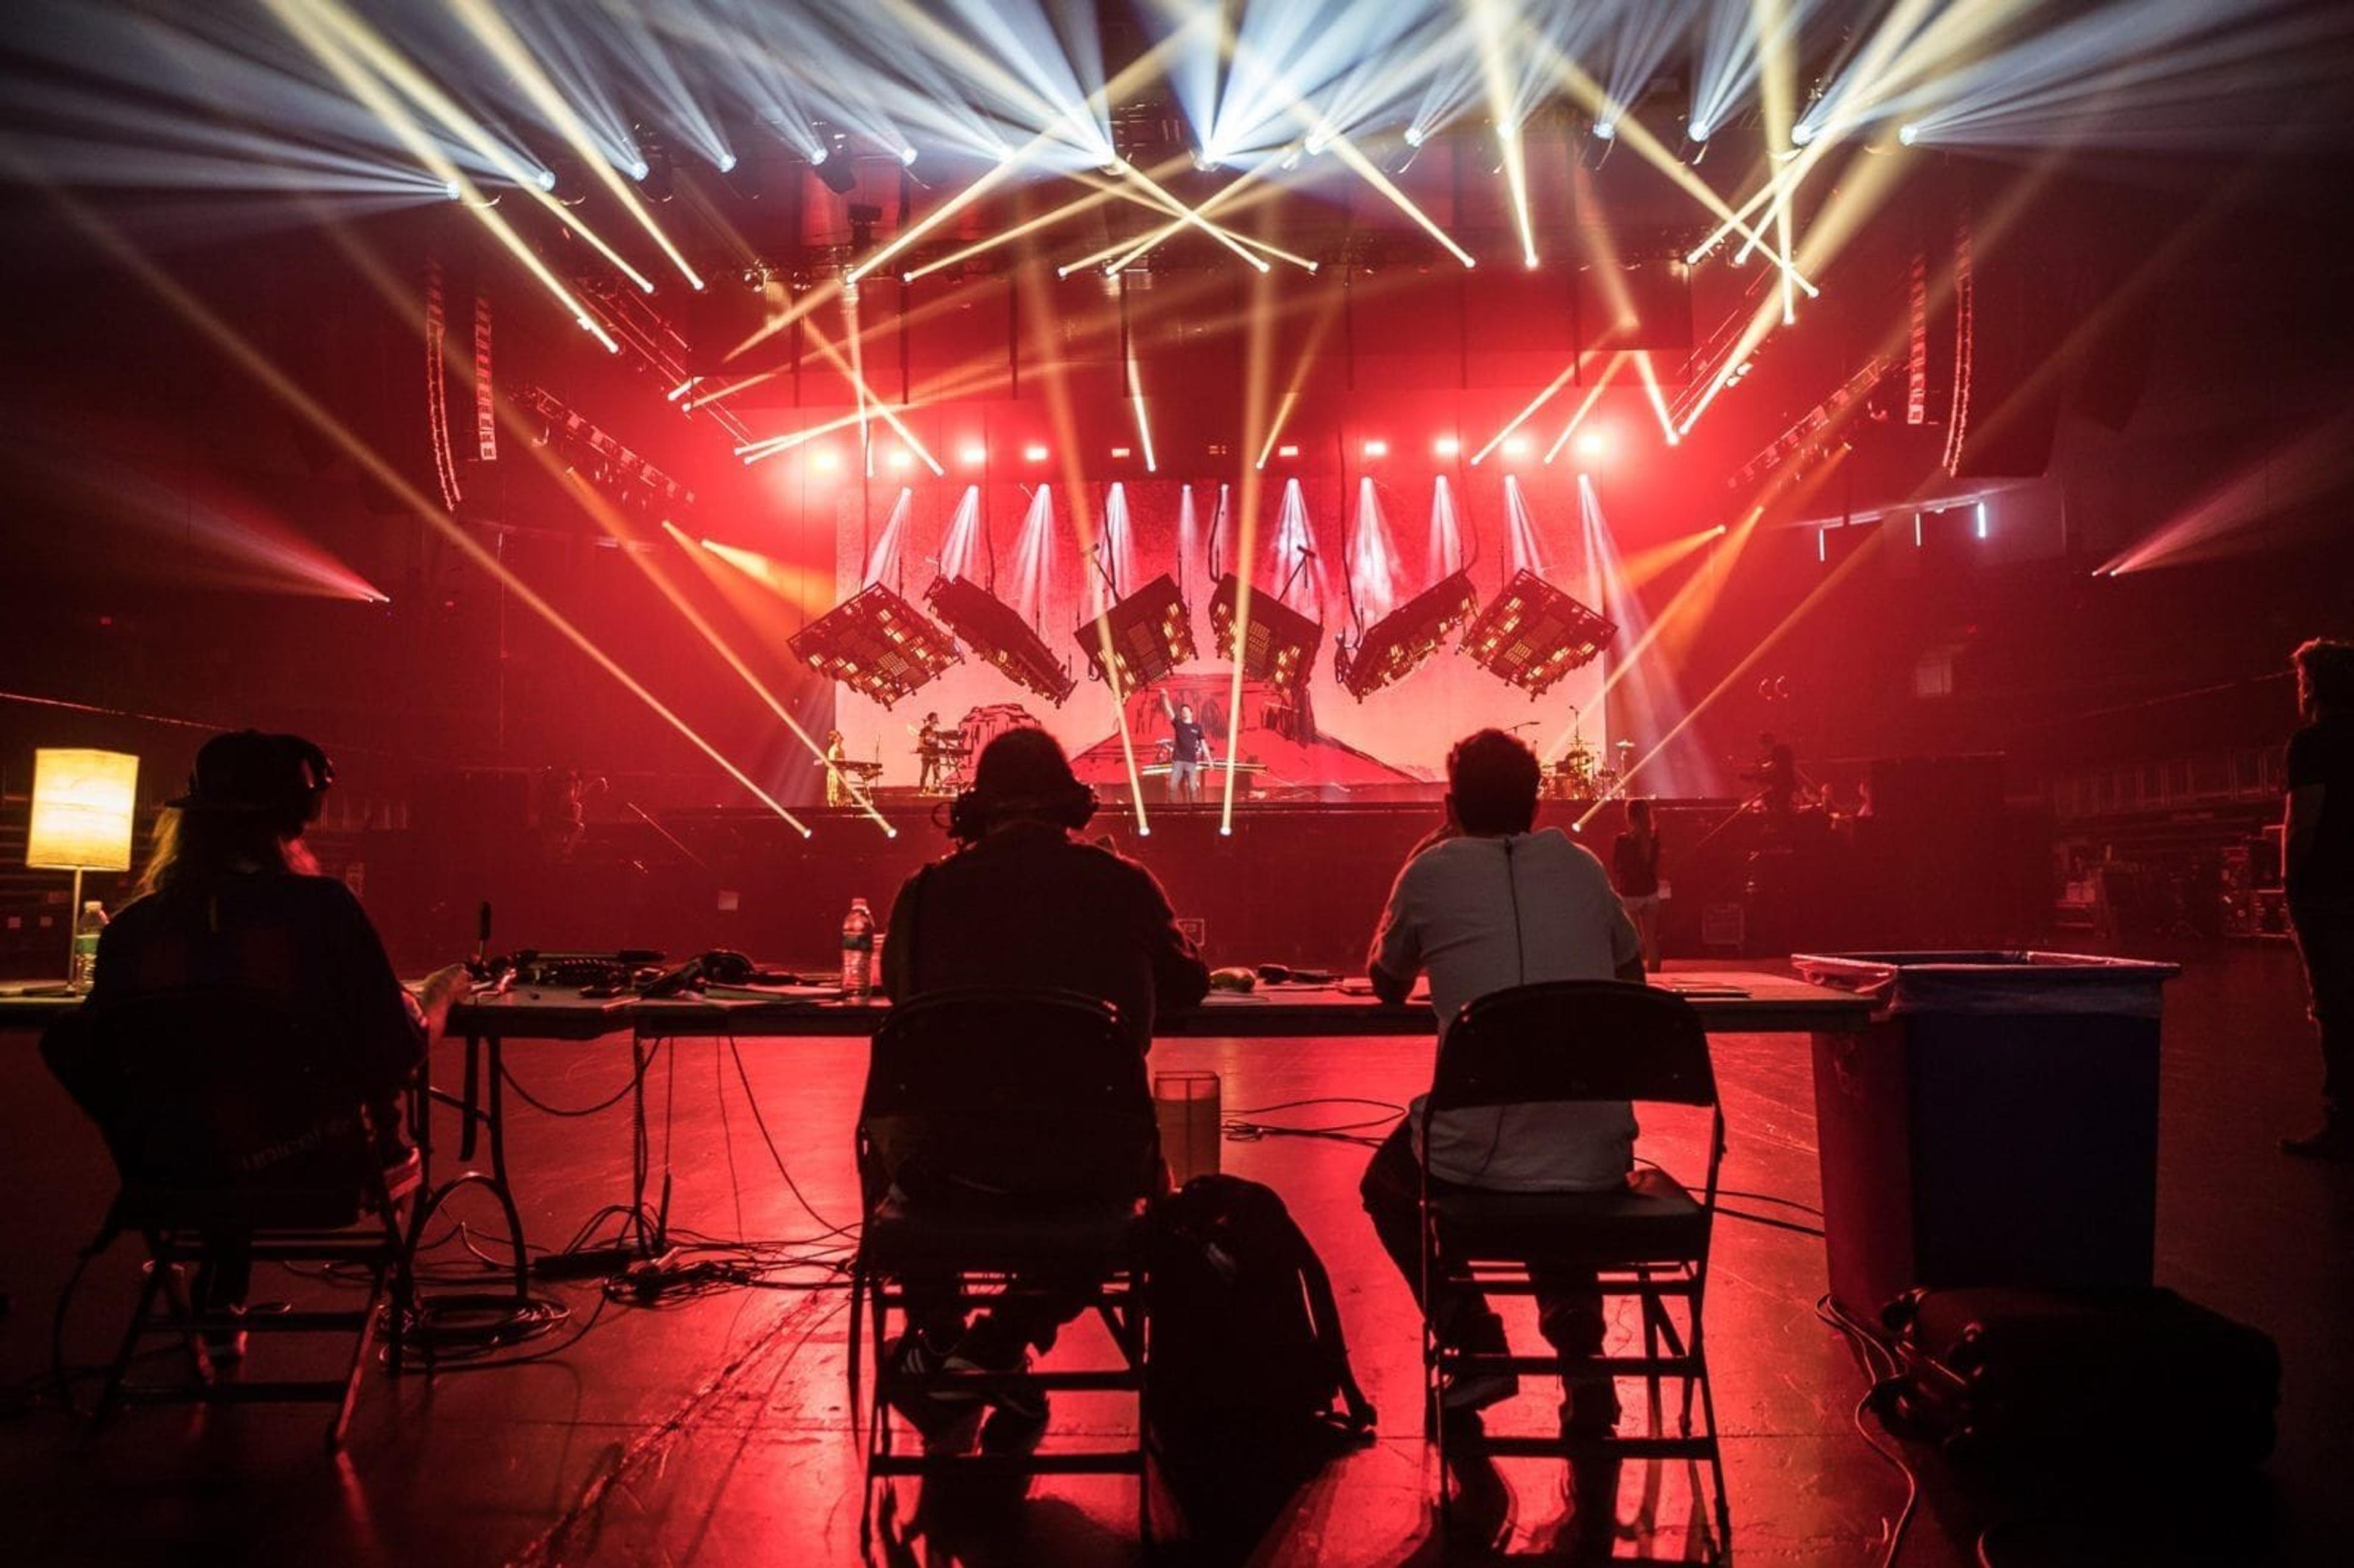 A few working figures sit and stand facing a stage, observing the progress of rehearsals for The Chainsmokers' upcoming tour.